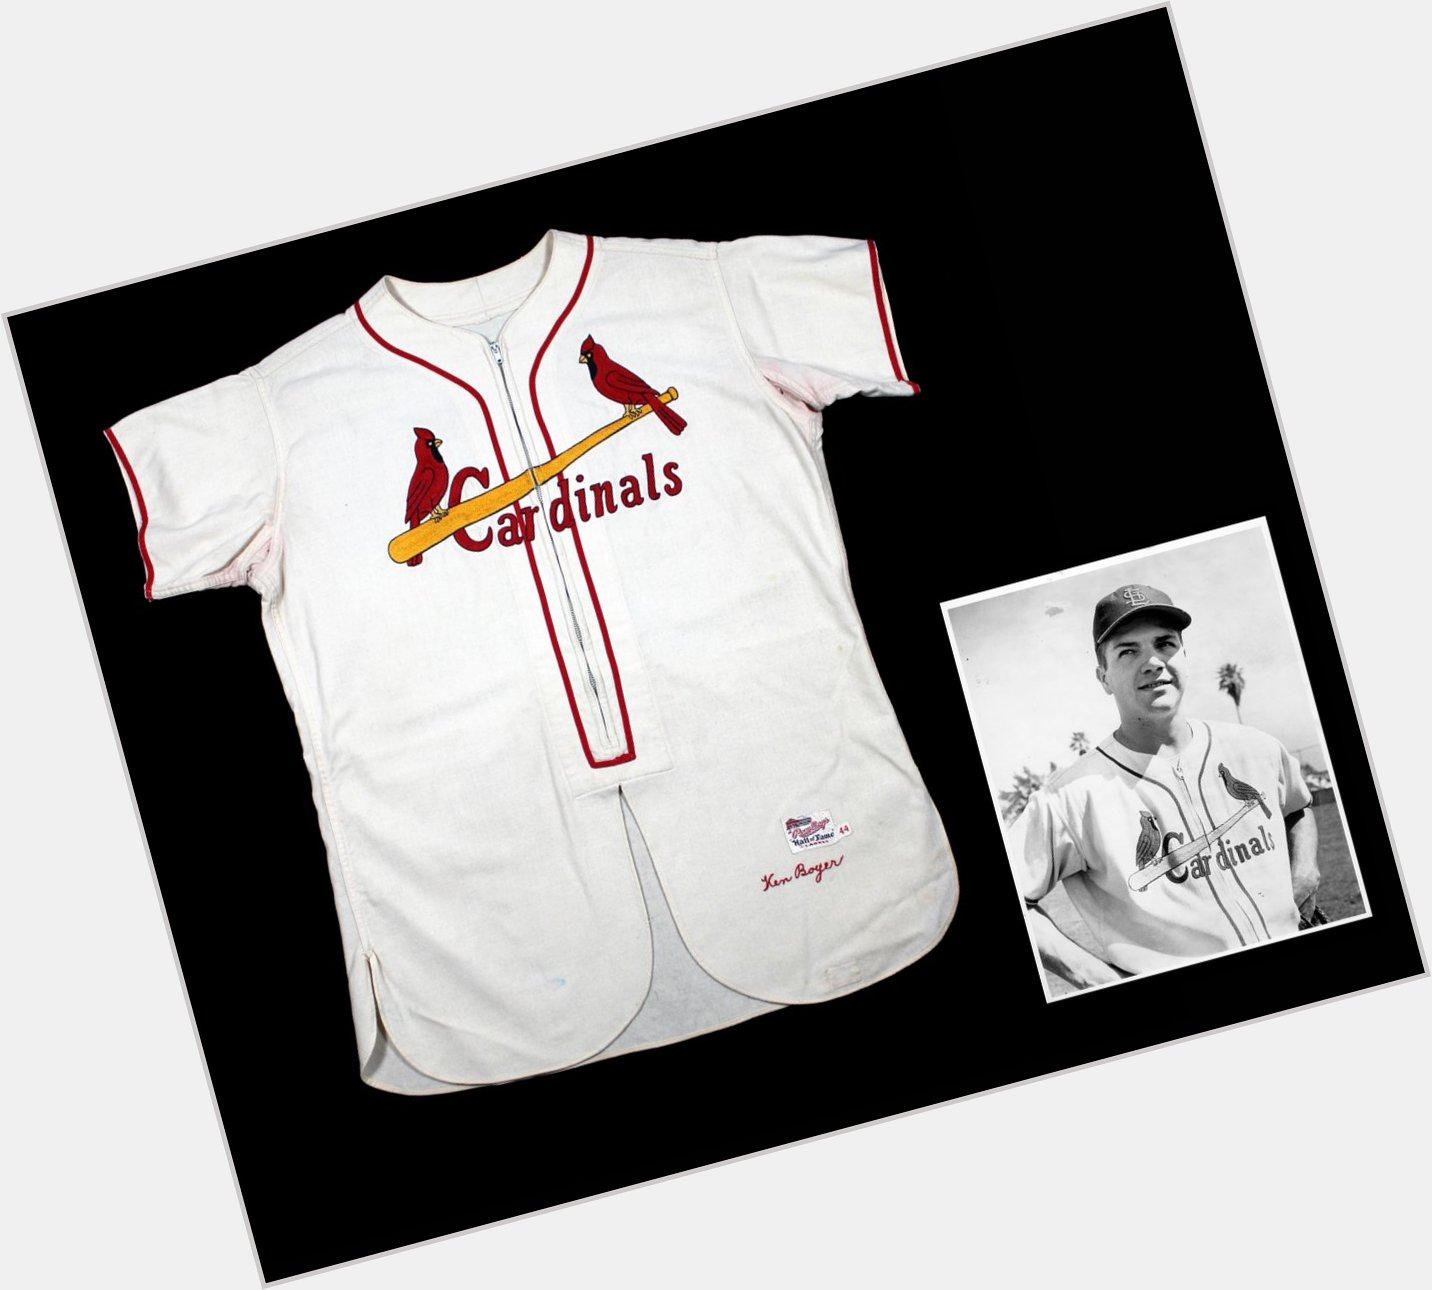 Happy Birthday to HOFer Ken Boyer, who would have been 84 today. His 1955 jersey is on display in the 